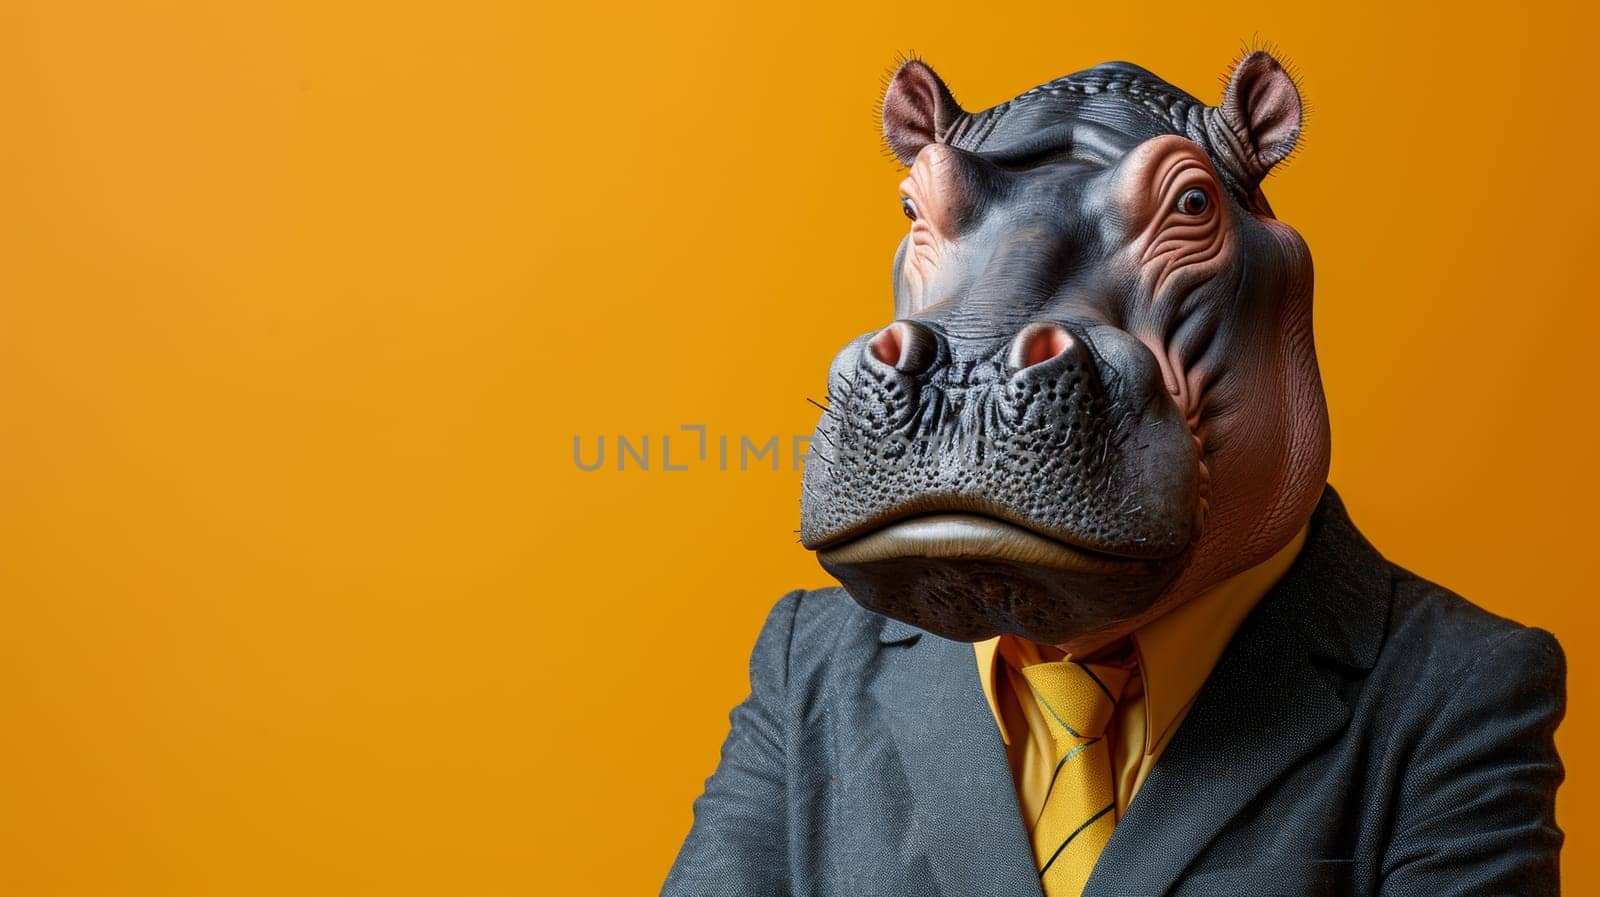 A man in a suit and tie with an animal head on, AI by starush